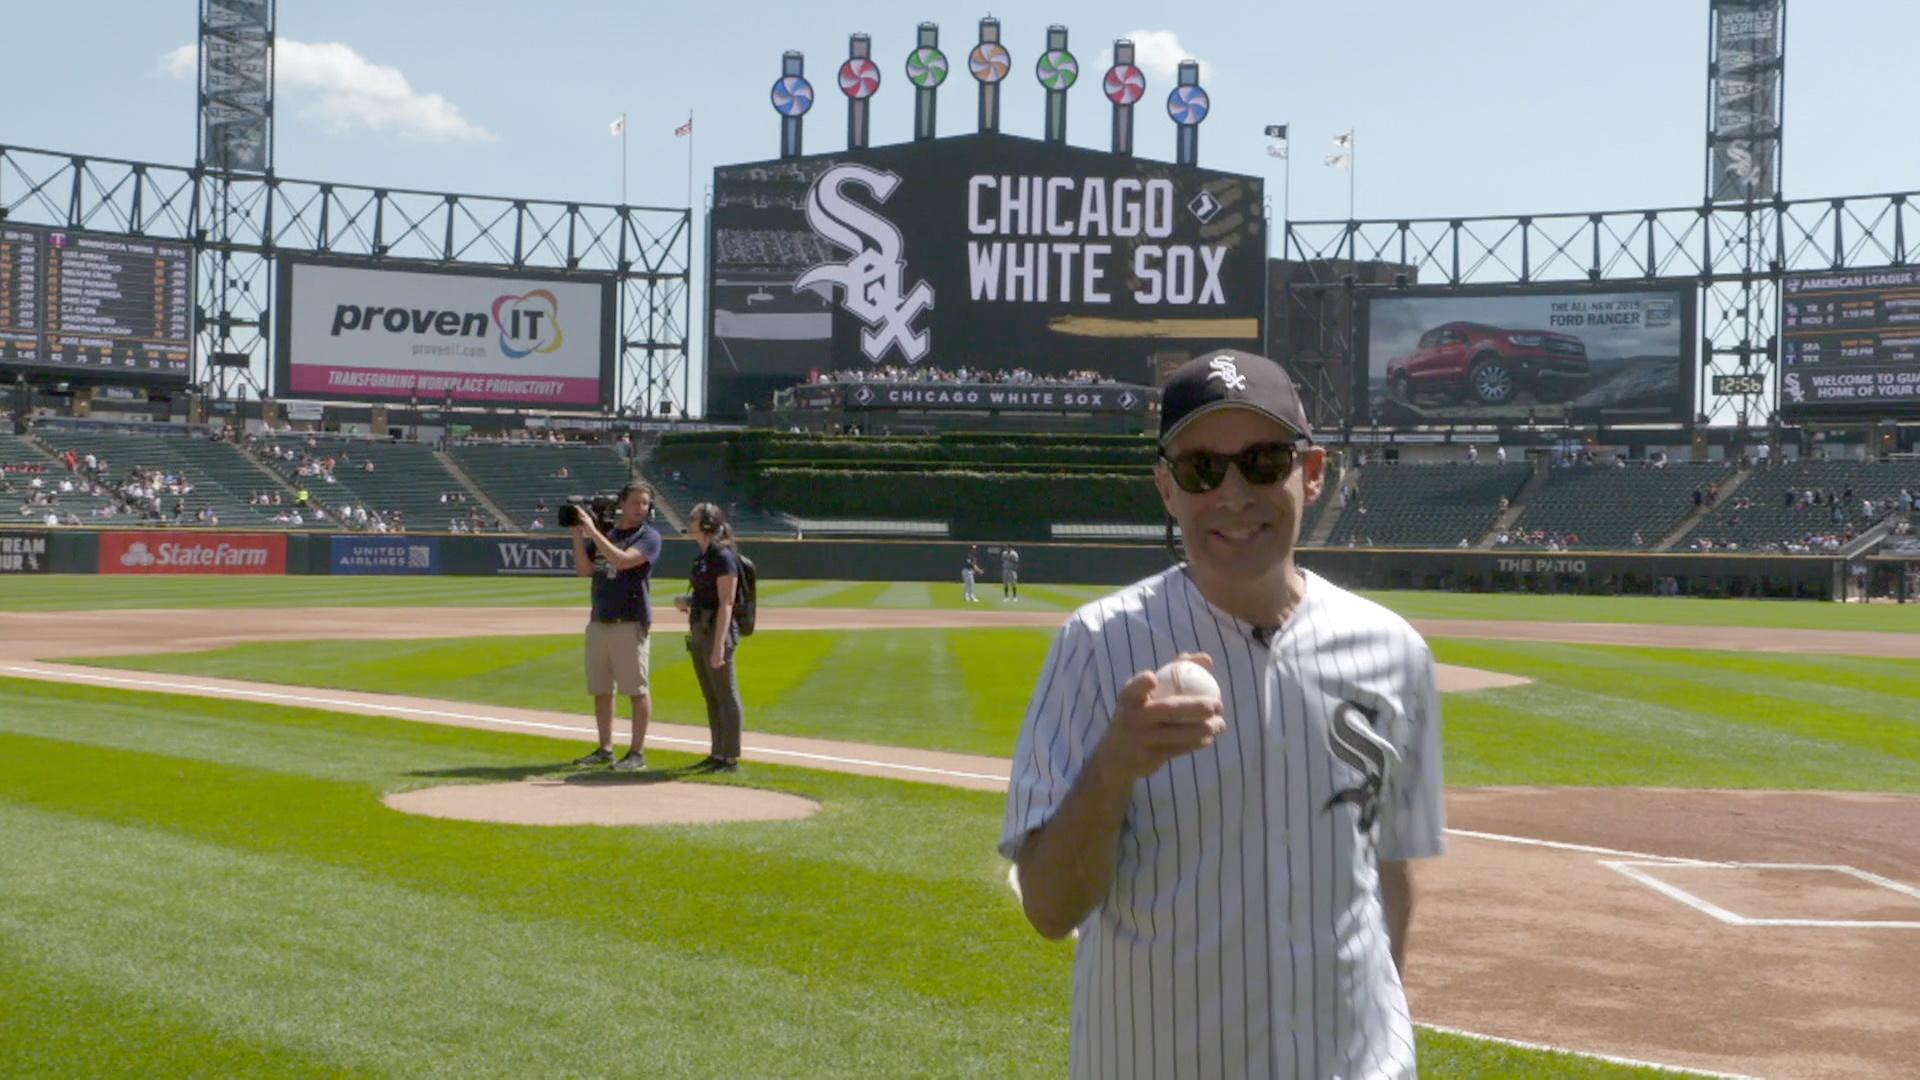 Chicago White Sox: What it's like in bleachers at Guaranteed Rate